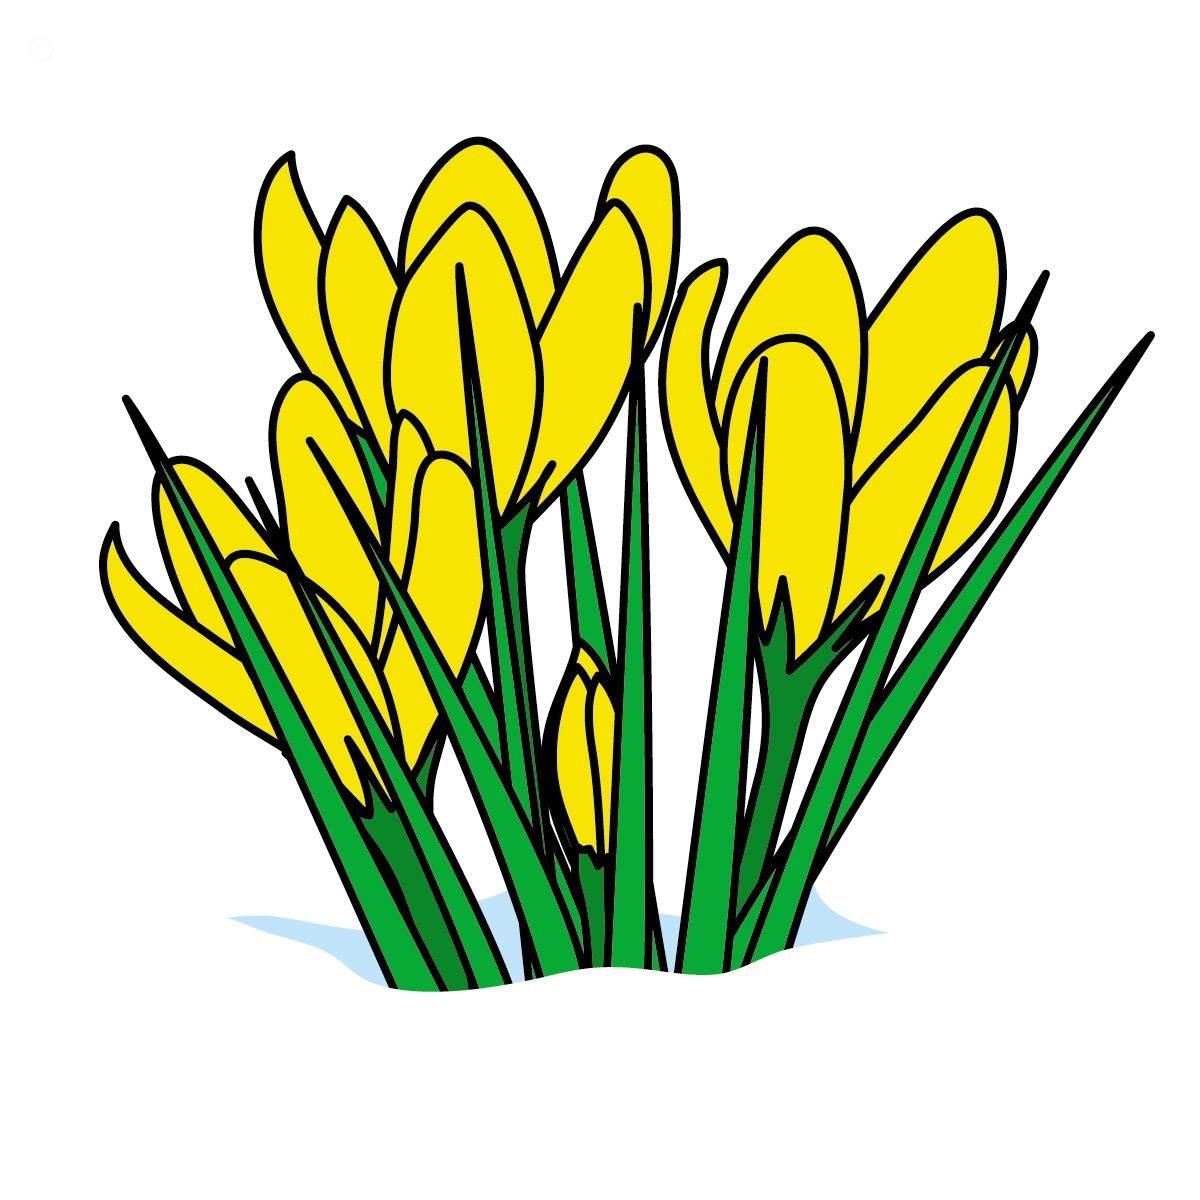 Vir g for kids. March clipart floral